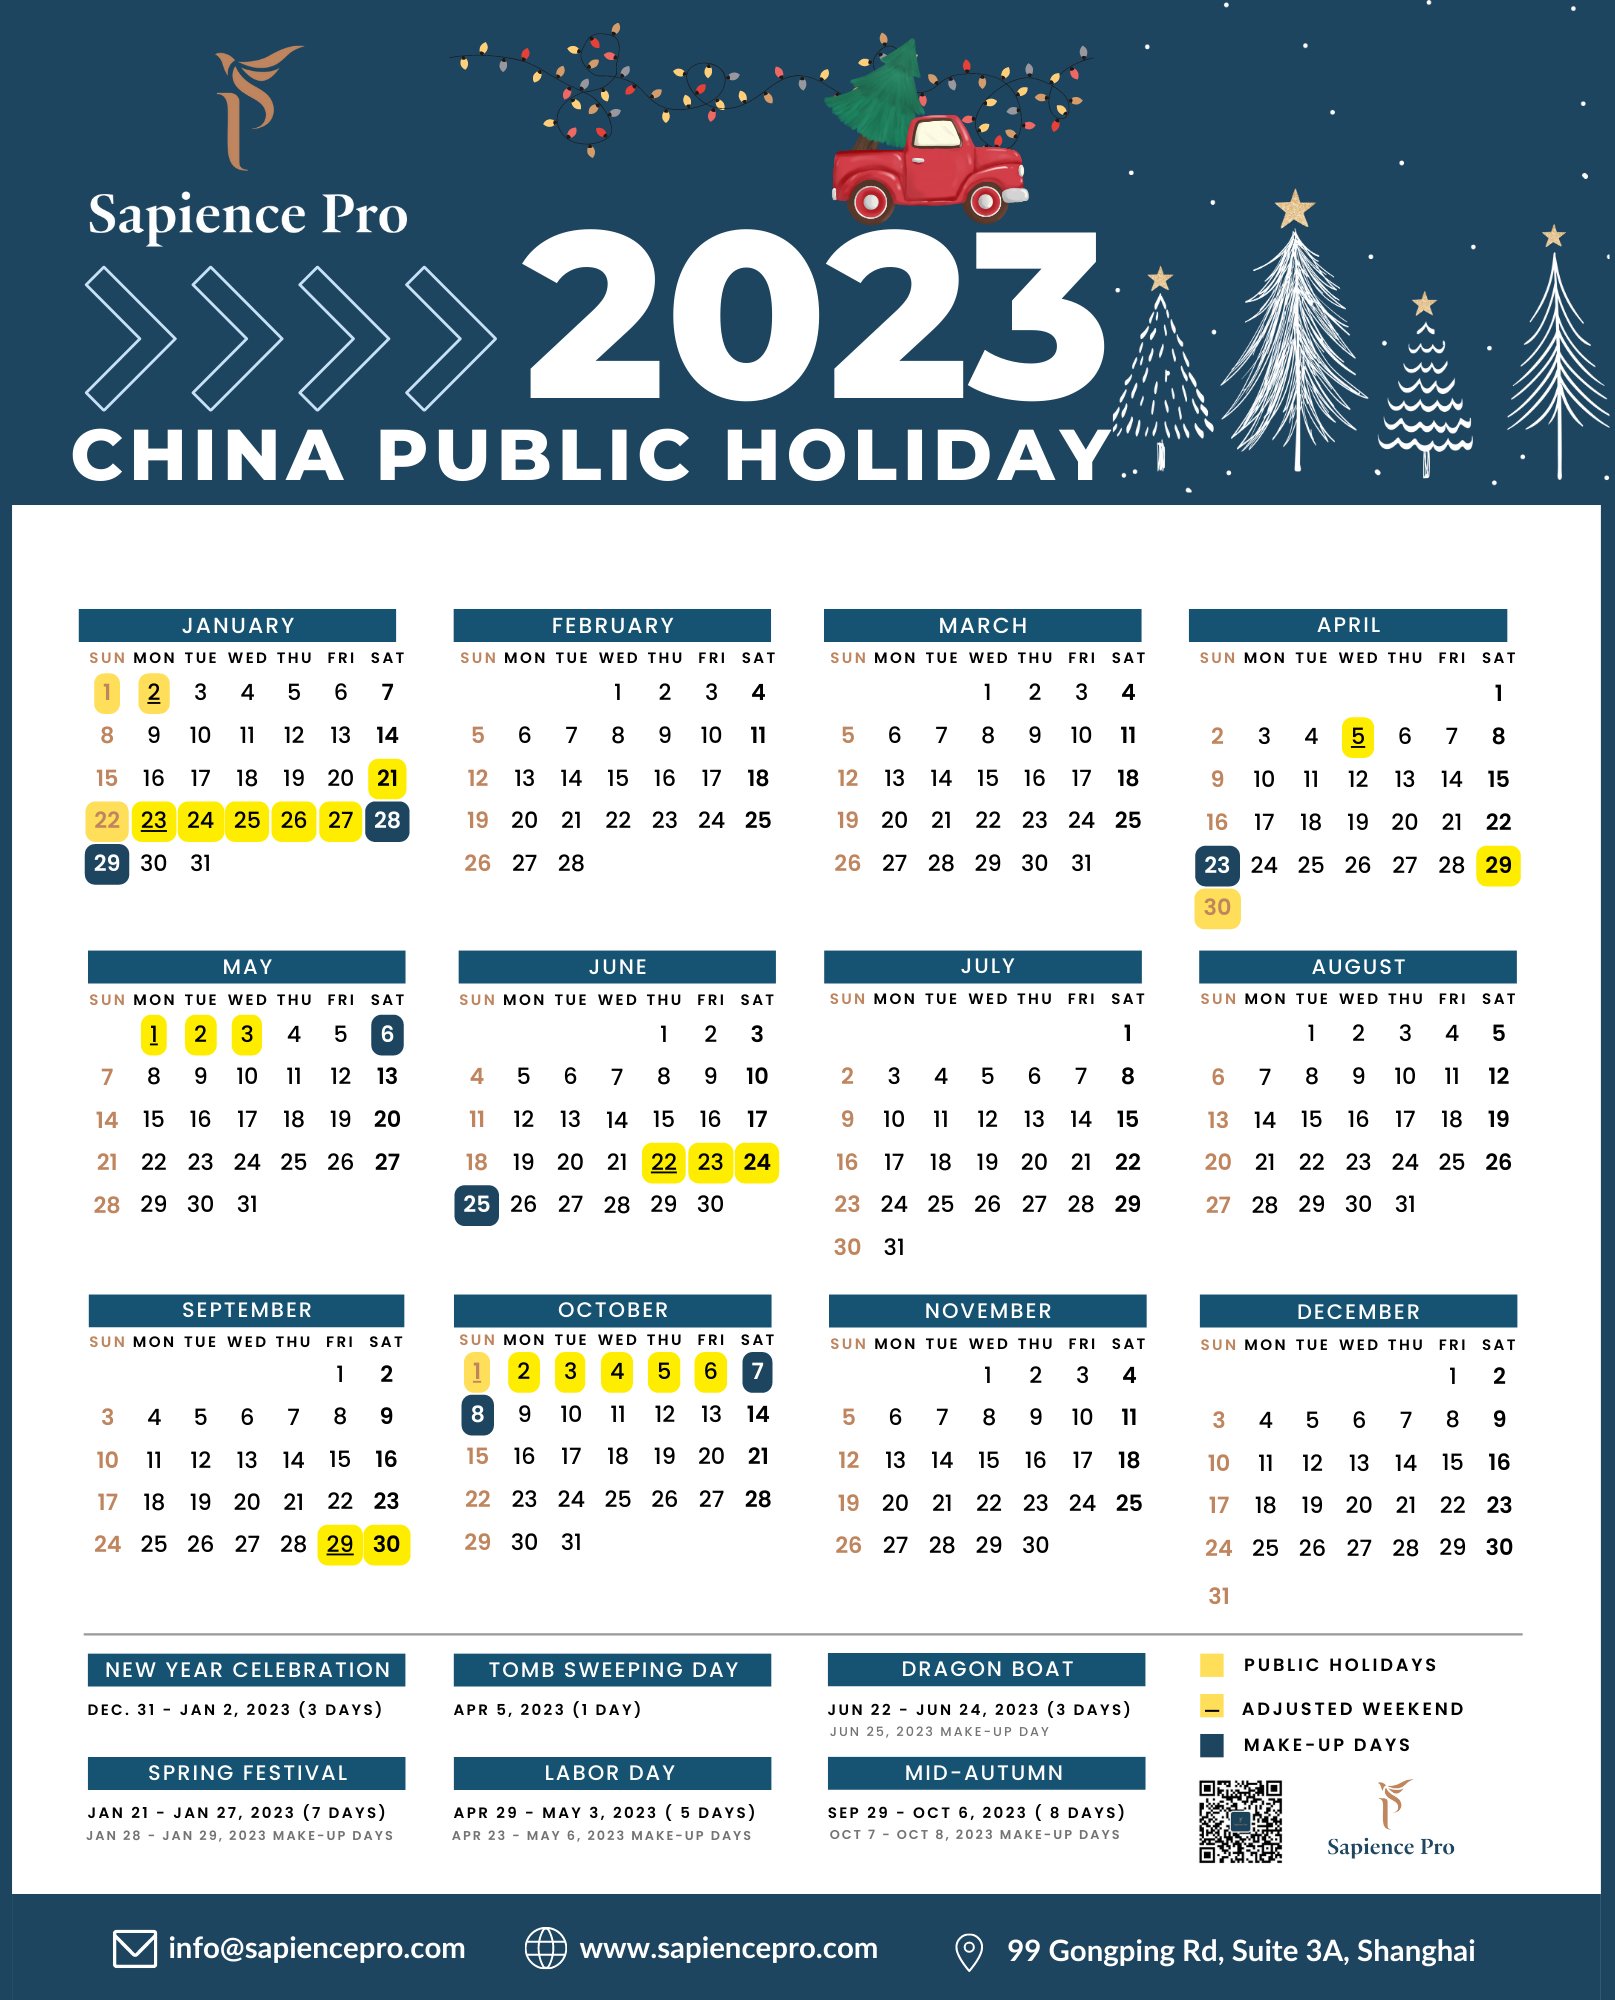 sapience-pro-on-twitter-china-2023-public-holiday-calendar-there-are